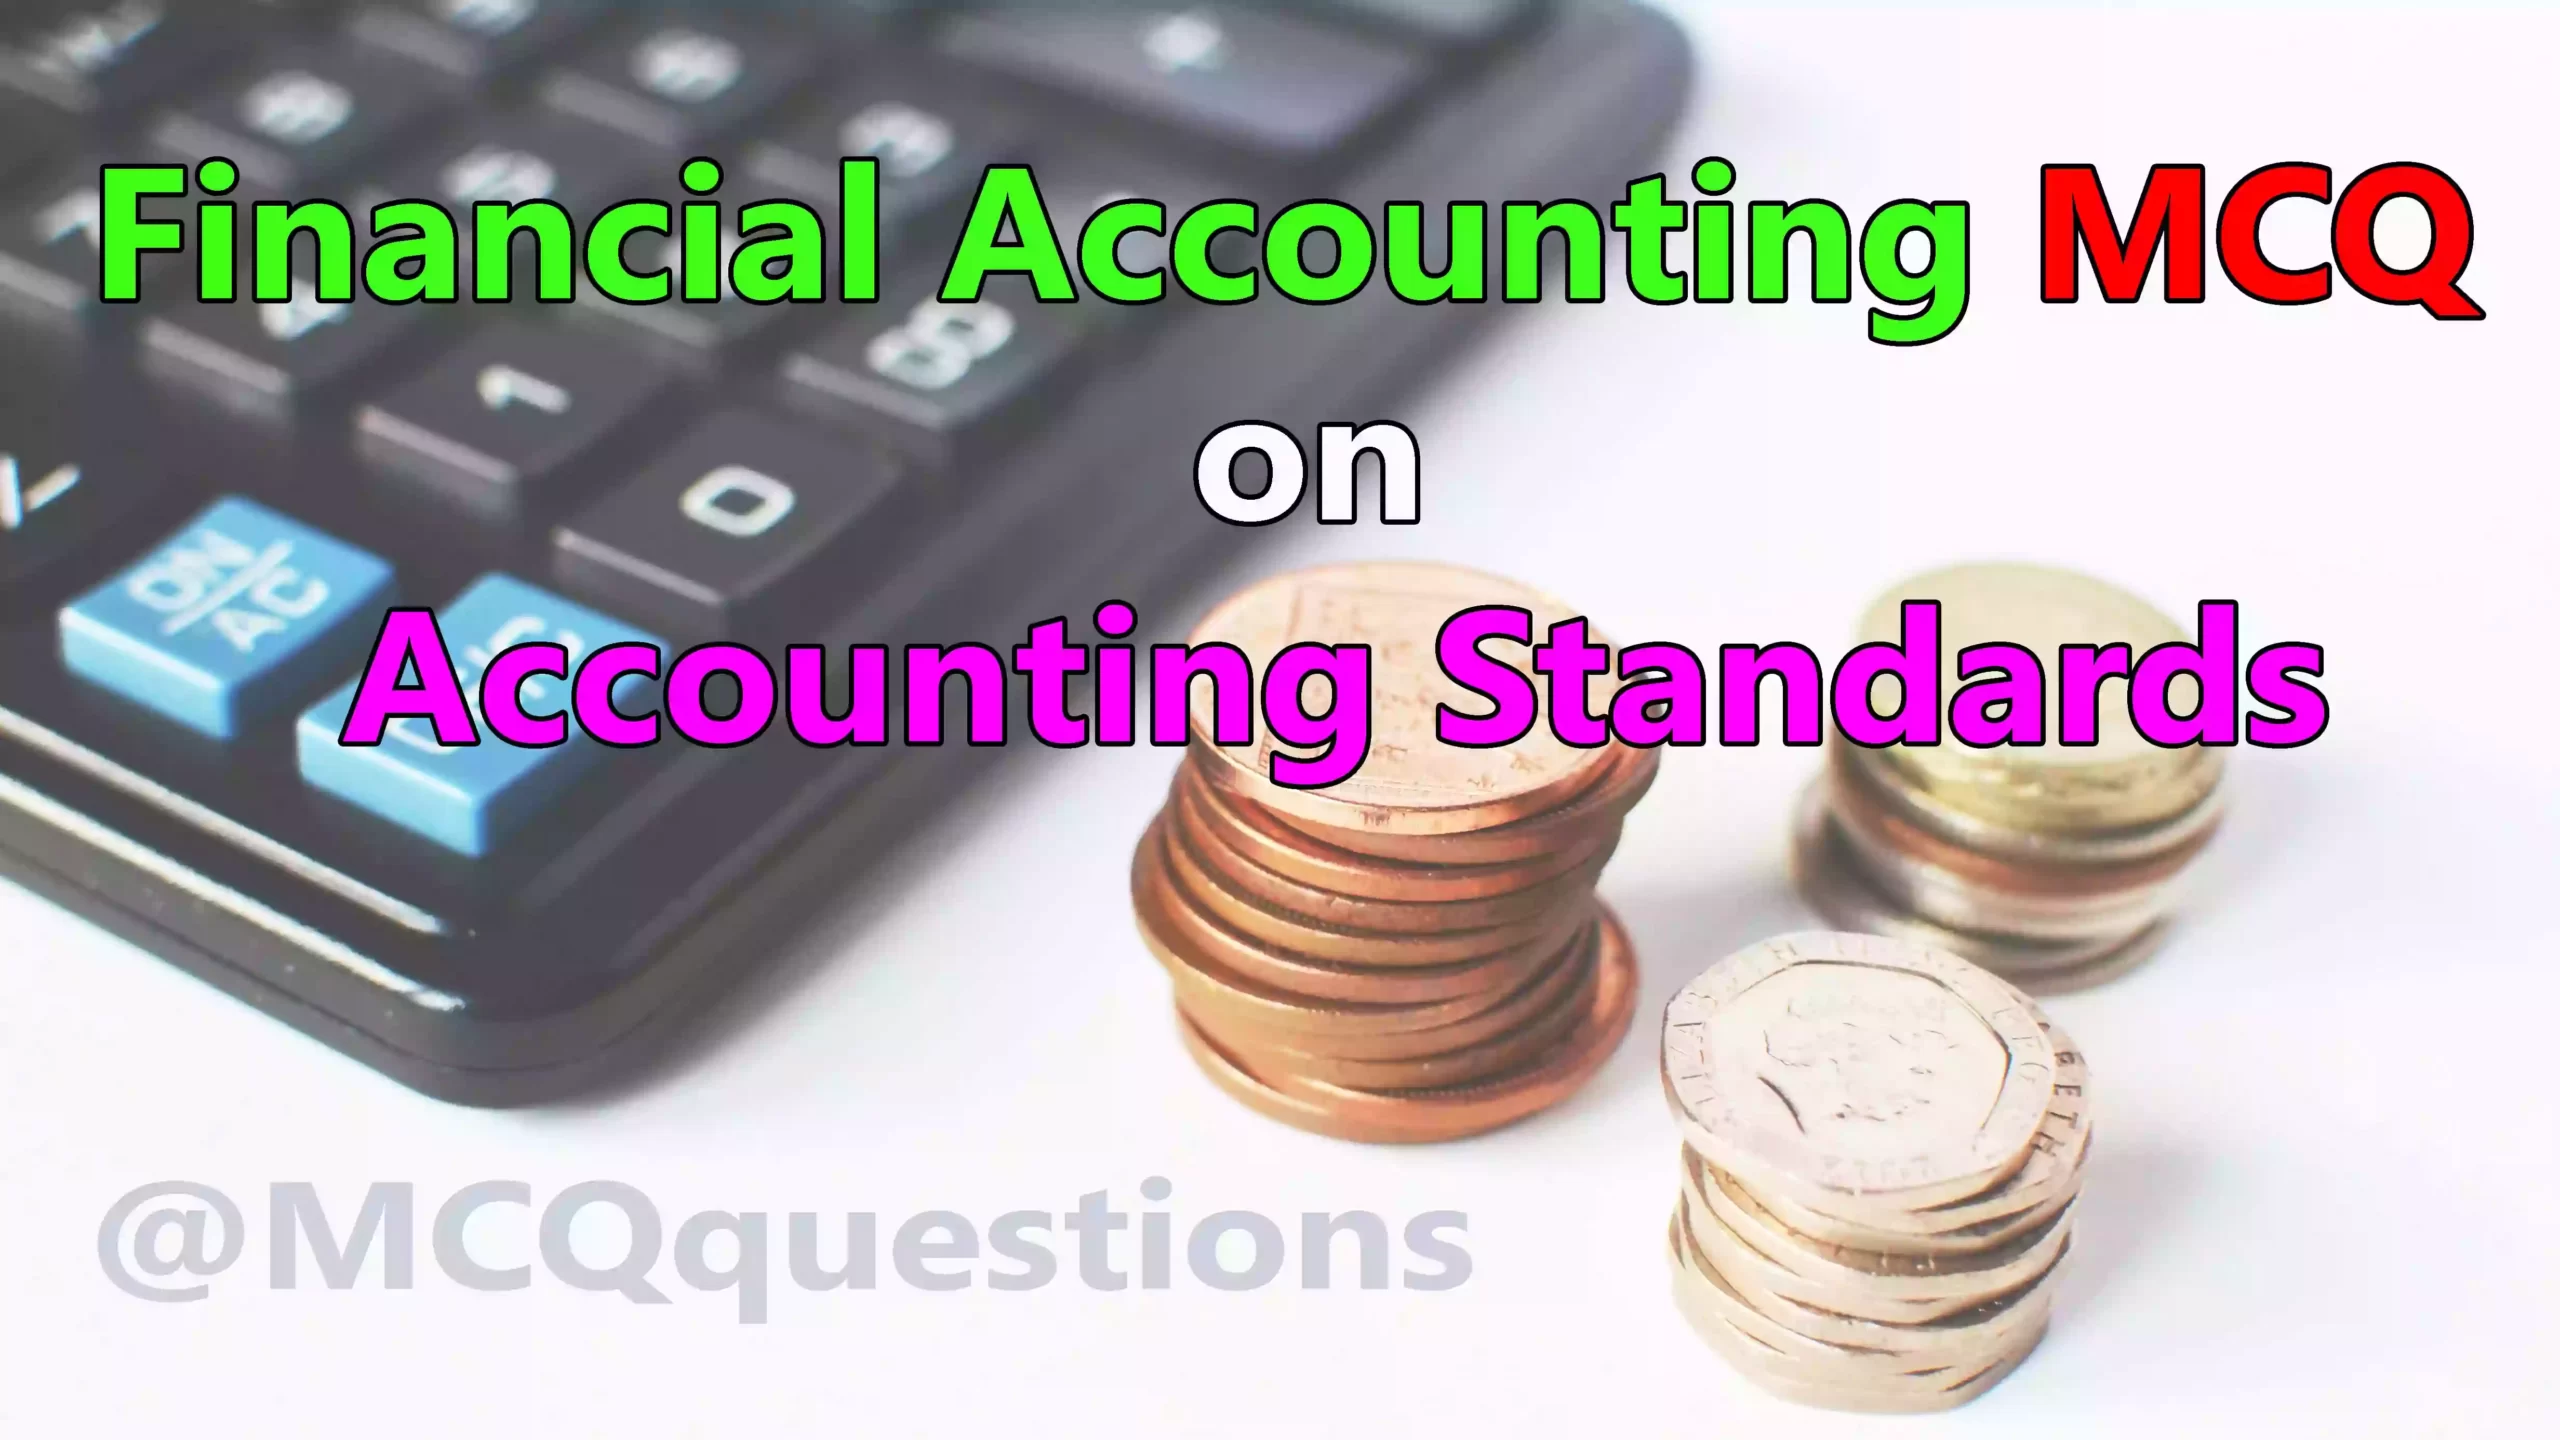 Financial Accounting MCQ on Accounting Standards